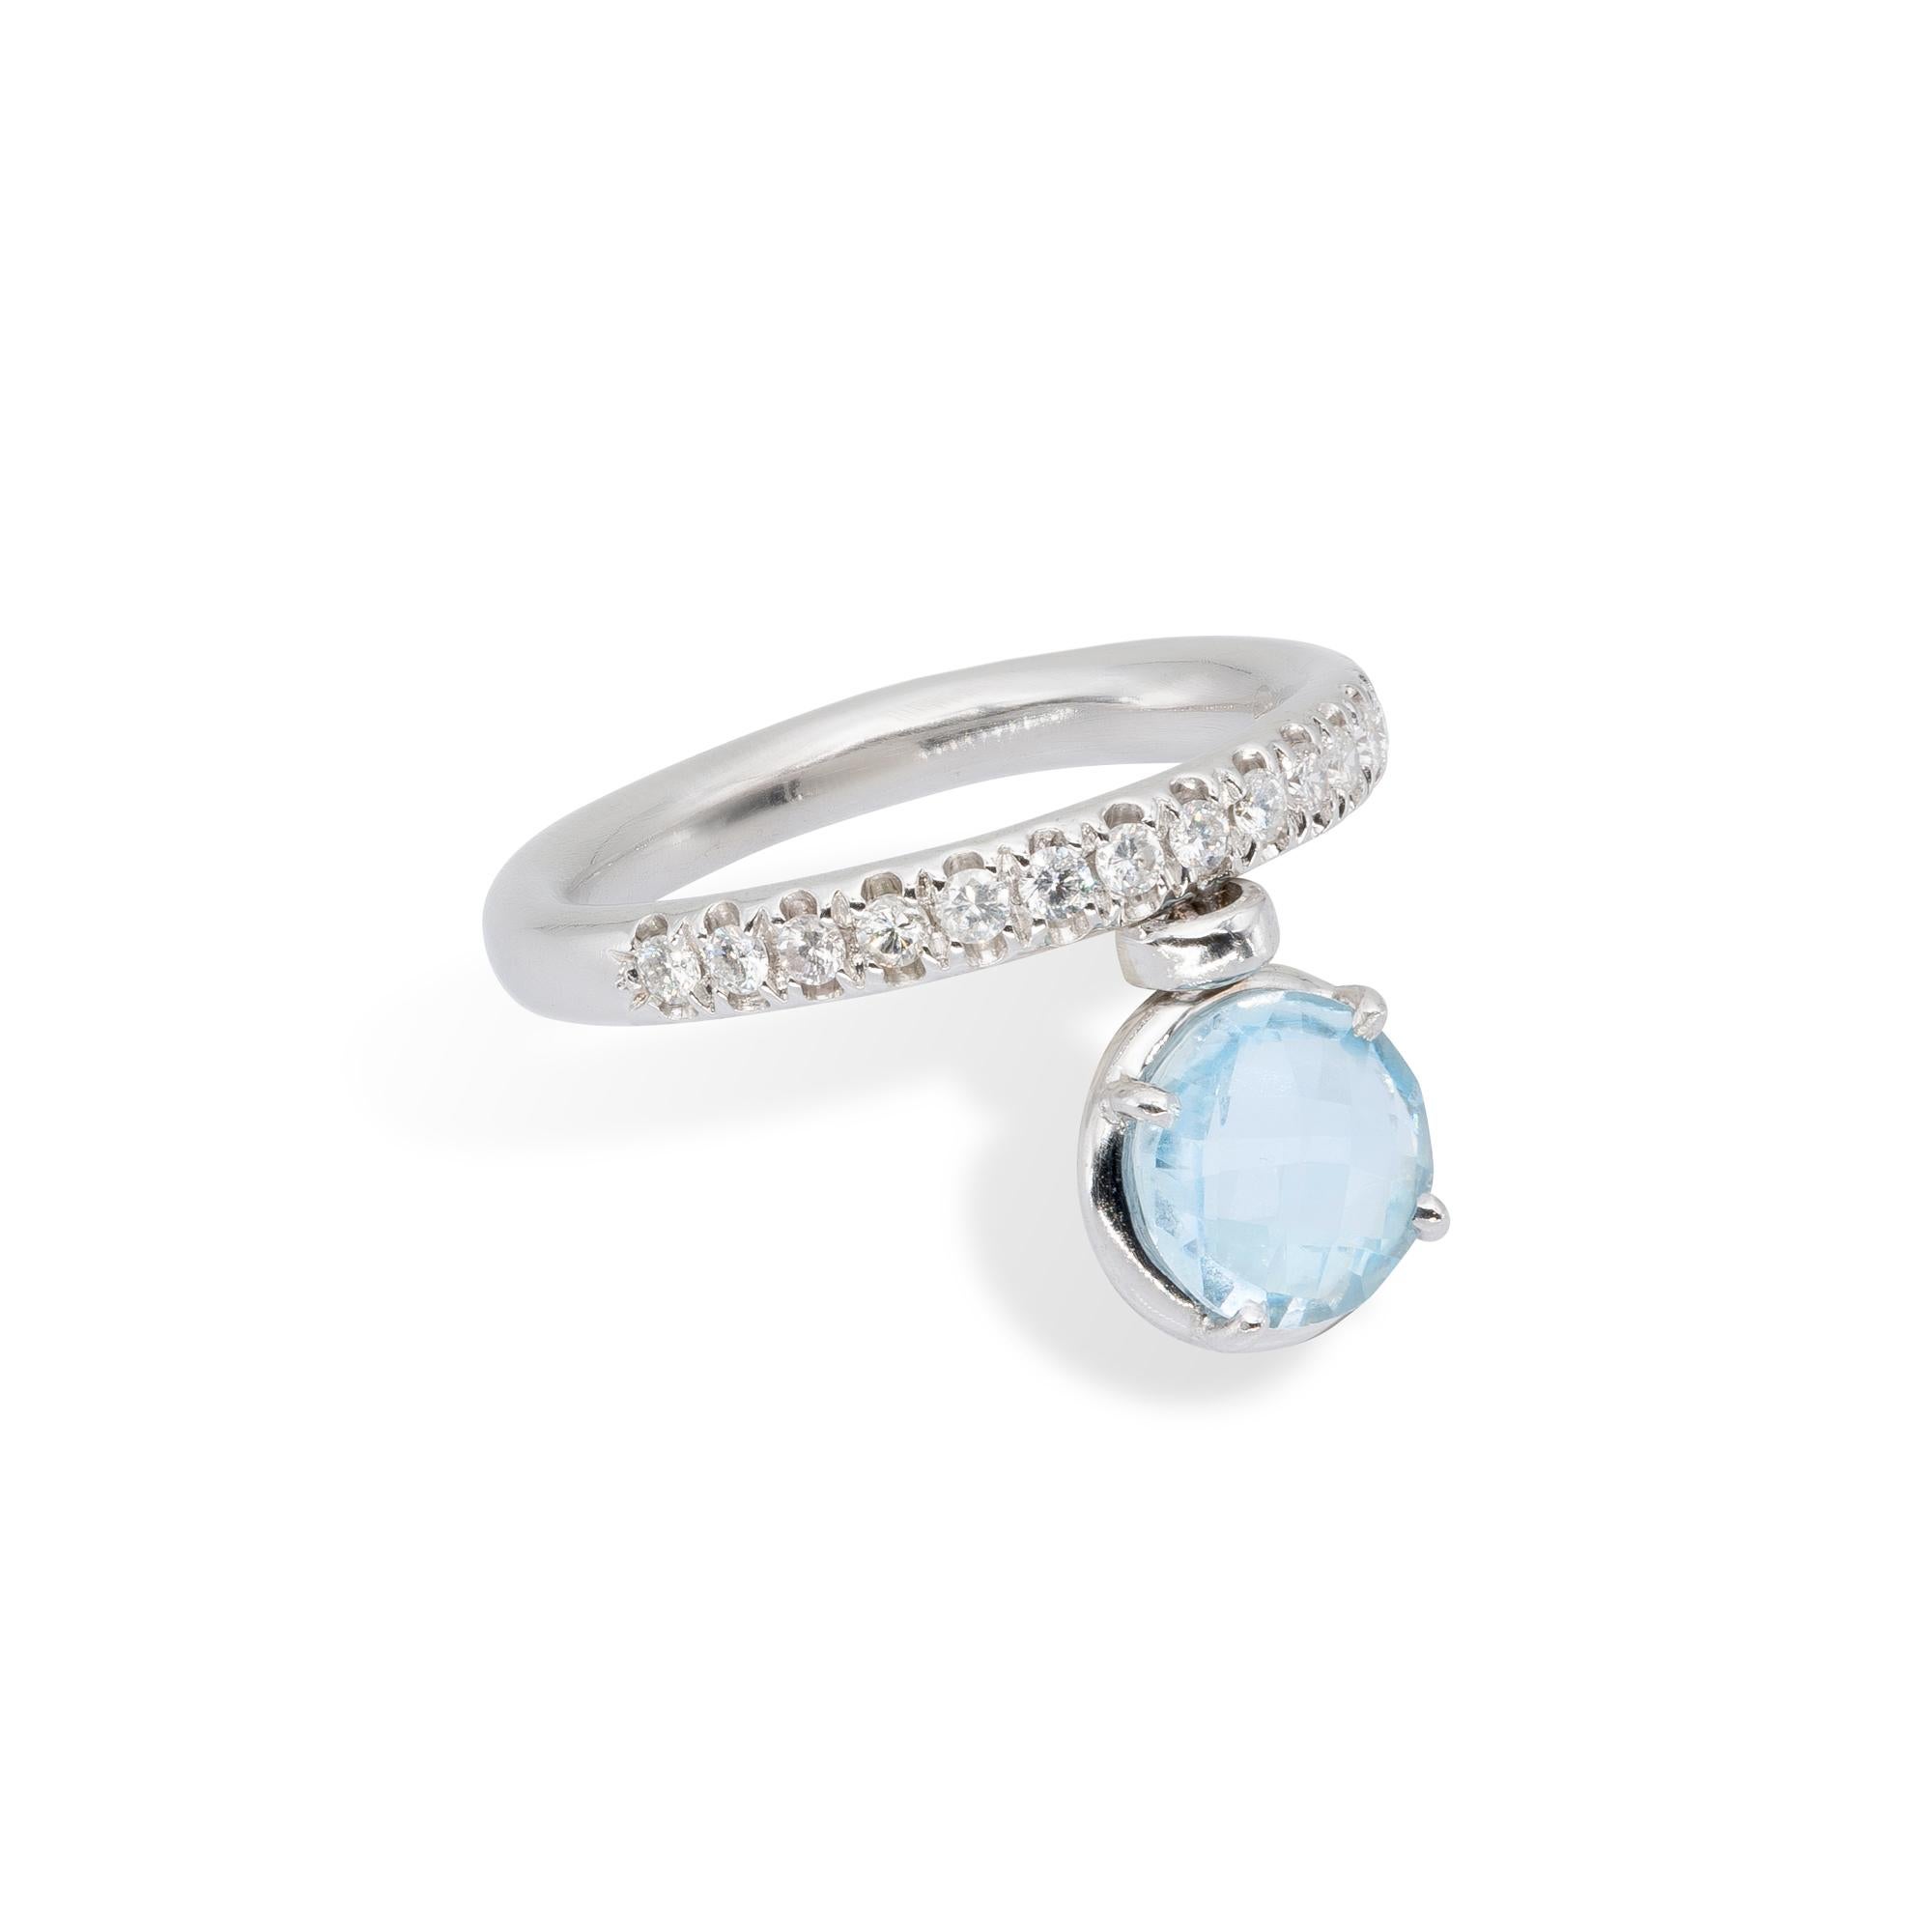 Briolette Cut d'Avossa Ring with Blue Topaz and White Diamonds For Sale